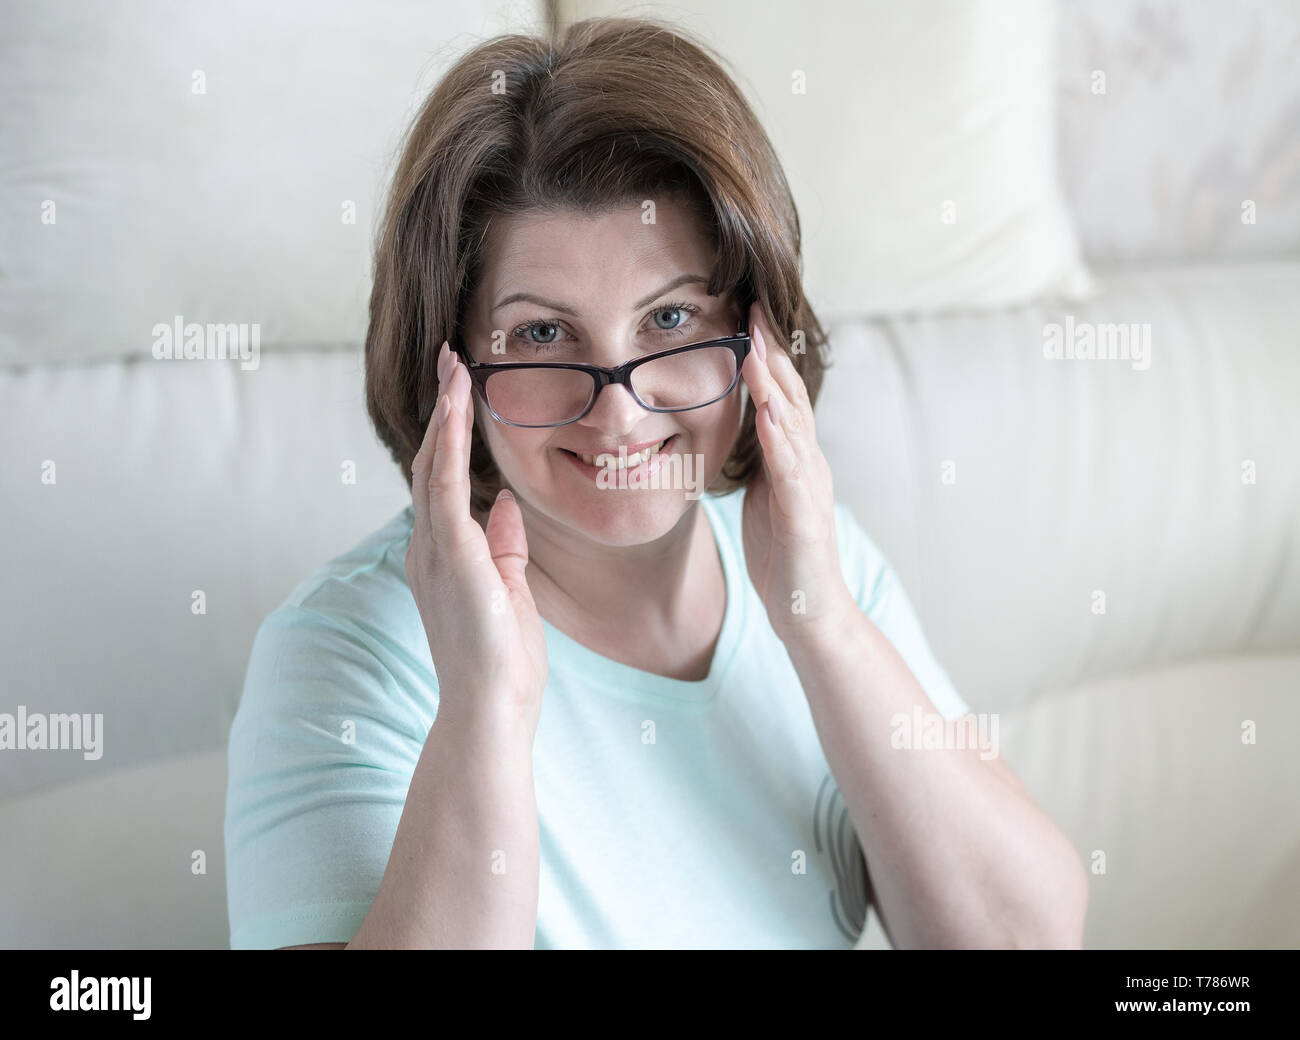 Portrait of a woman with glasses in home interior Stock Photo